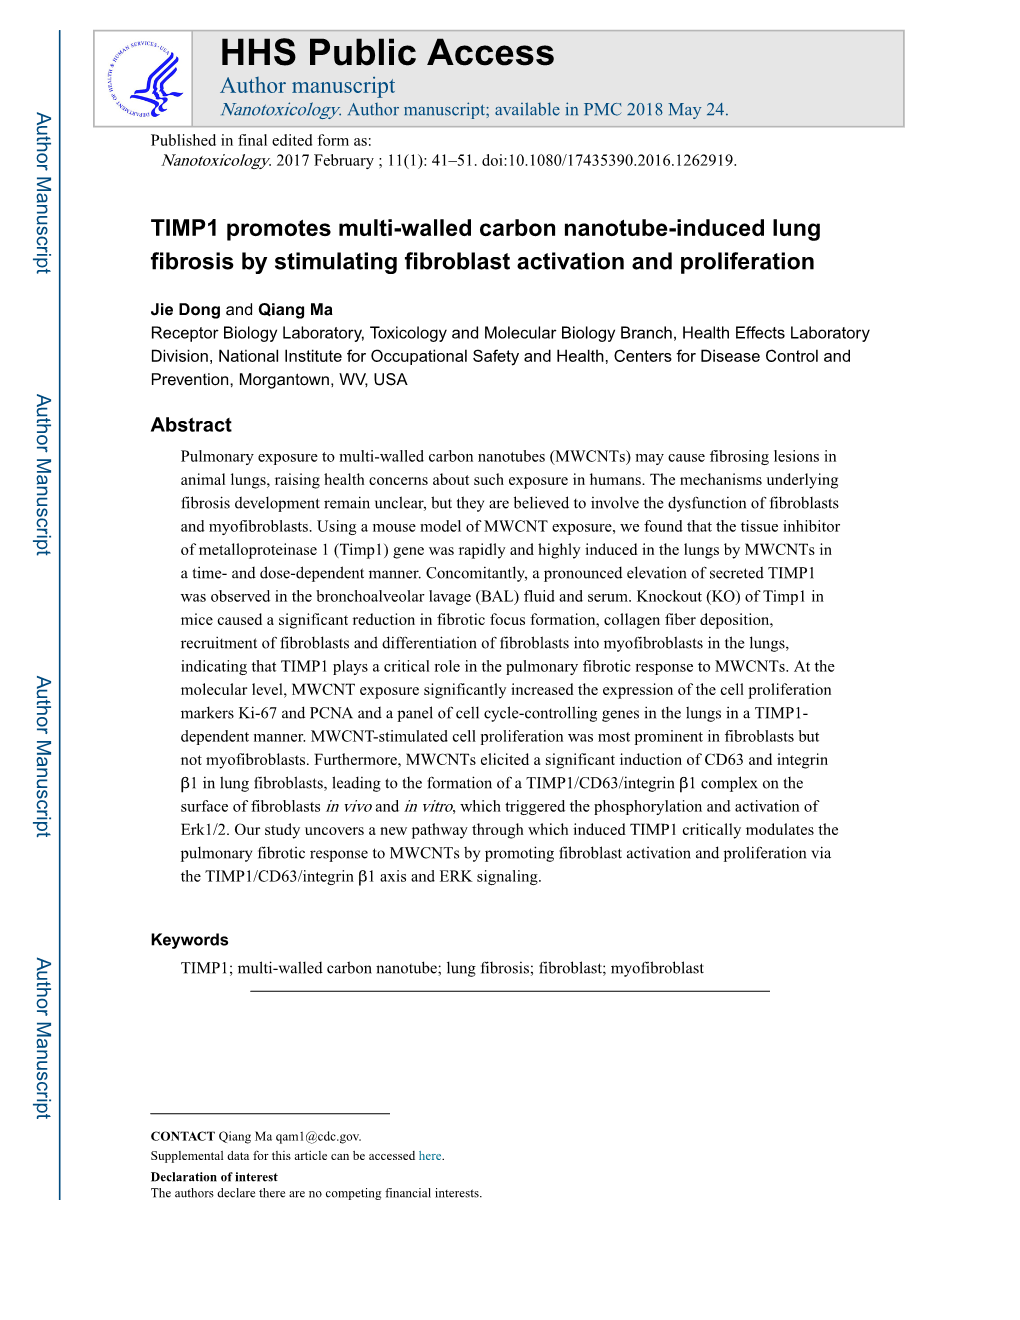 TIMP1 Promotes Multi-Walled Carbon Nanotube-Induced Lung Fibrosis by Stimulating Fibroblast Activation and Proliferation